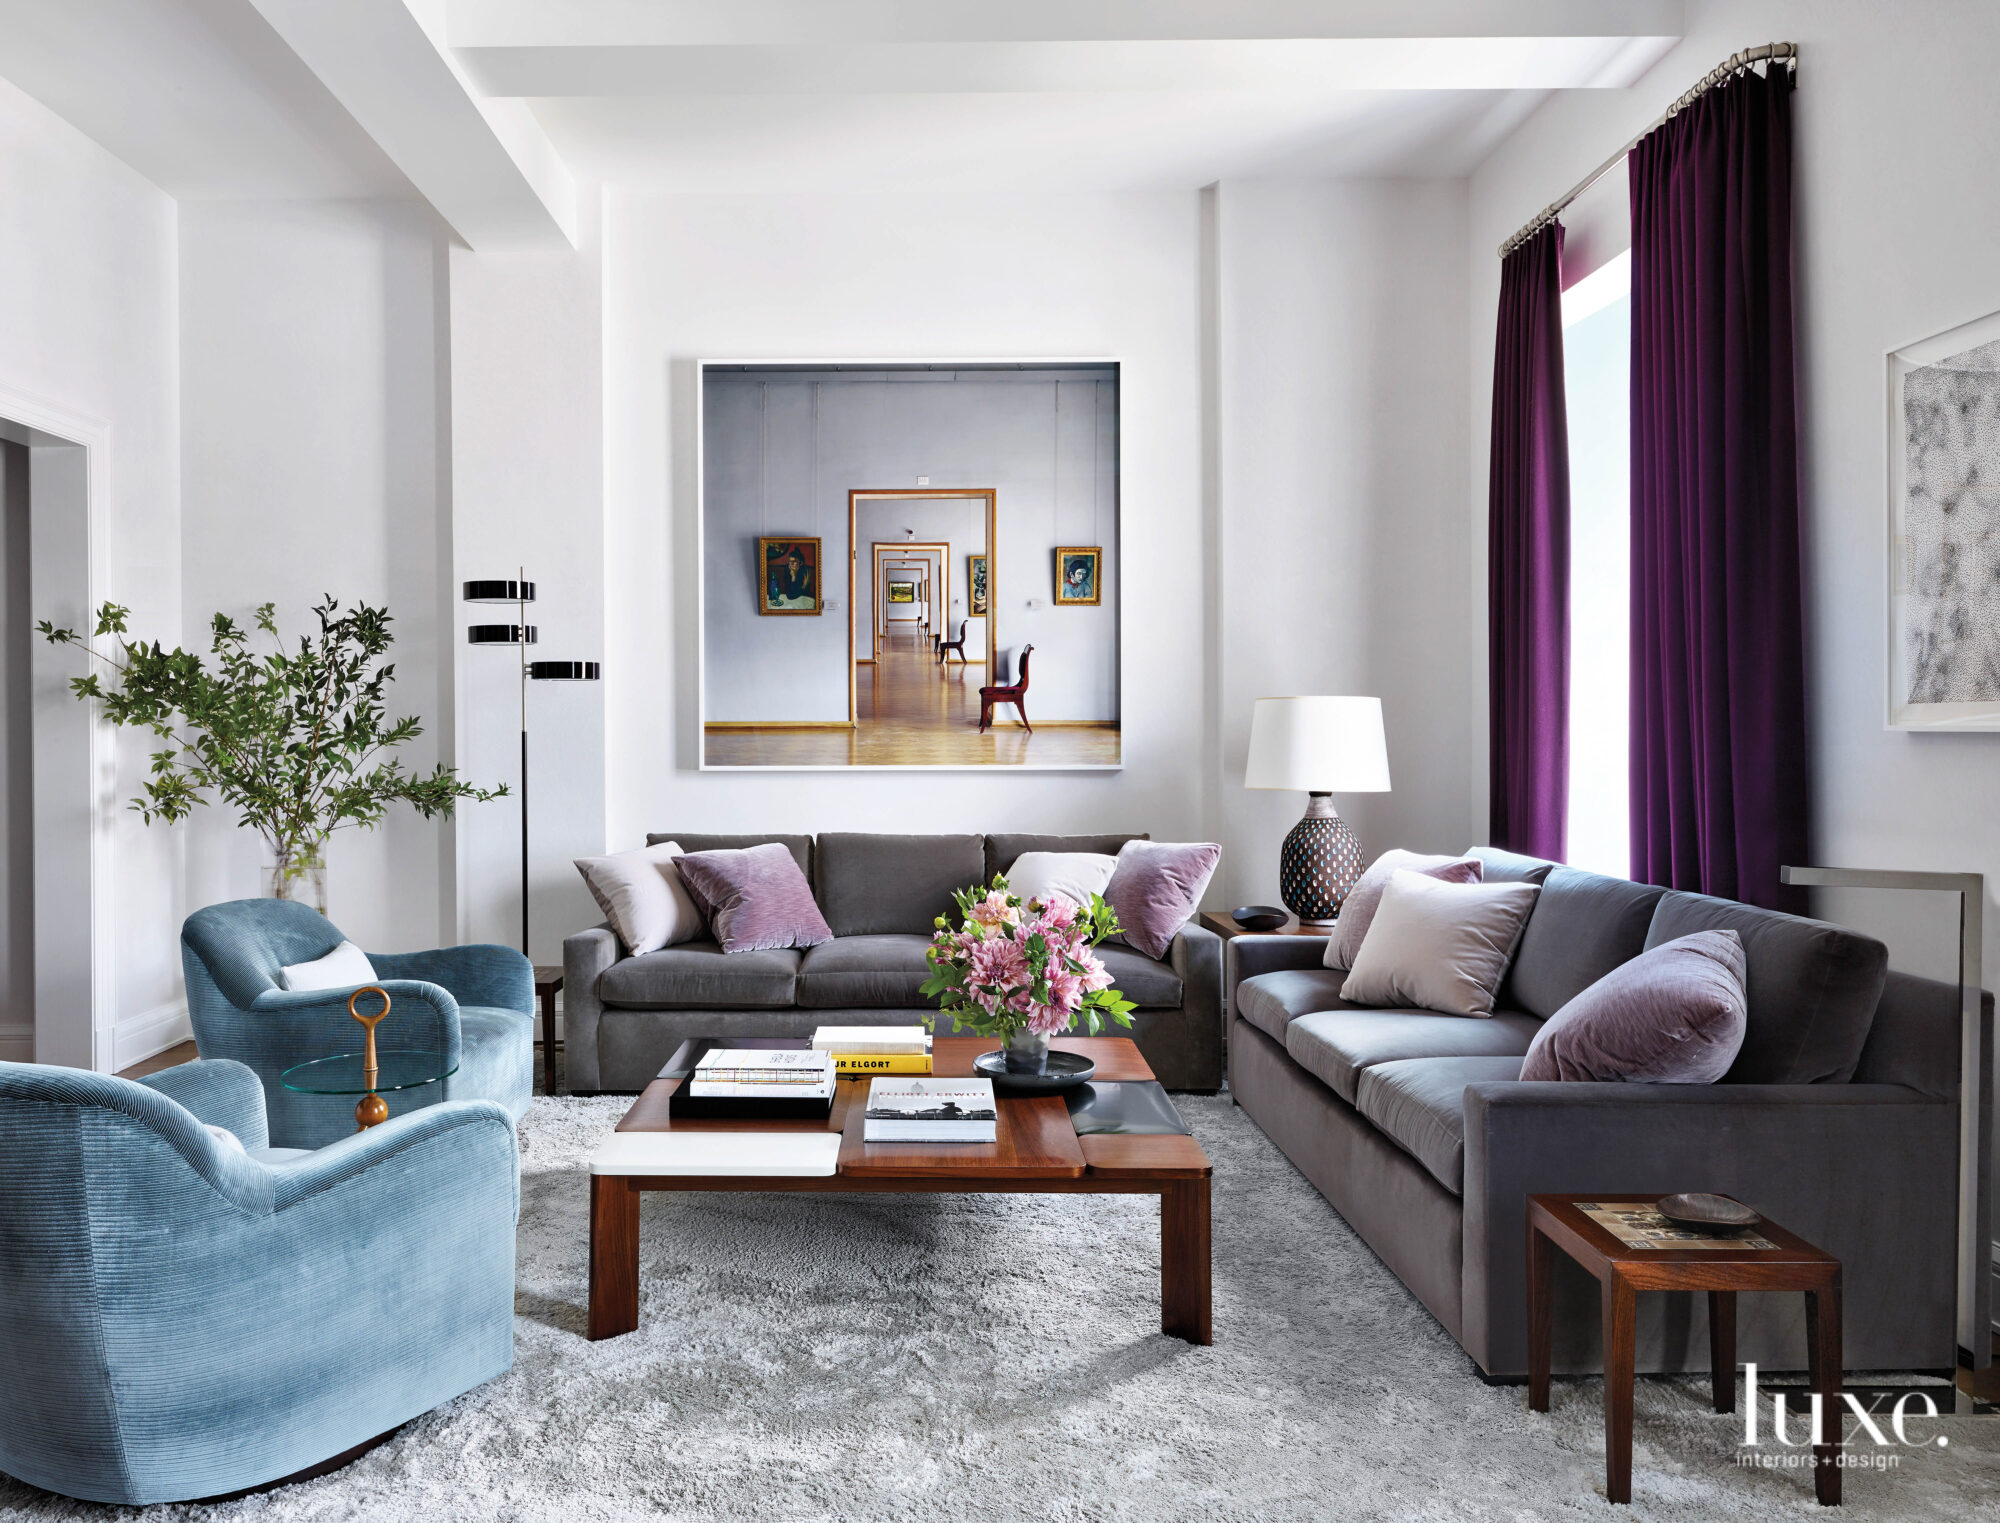 Cool colors are scattered throughout a plentiful living space that's atop a soft area rug